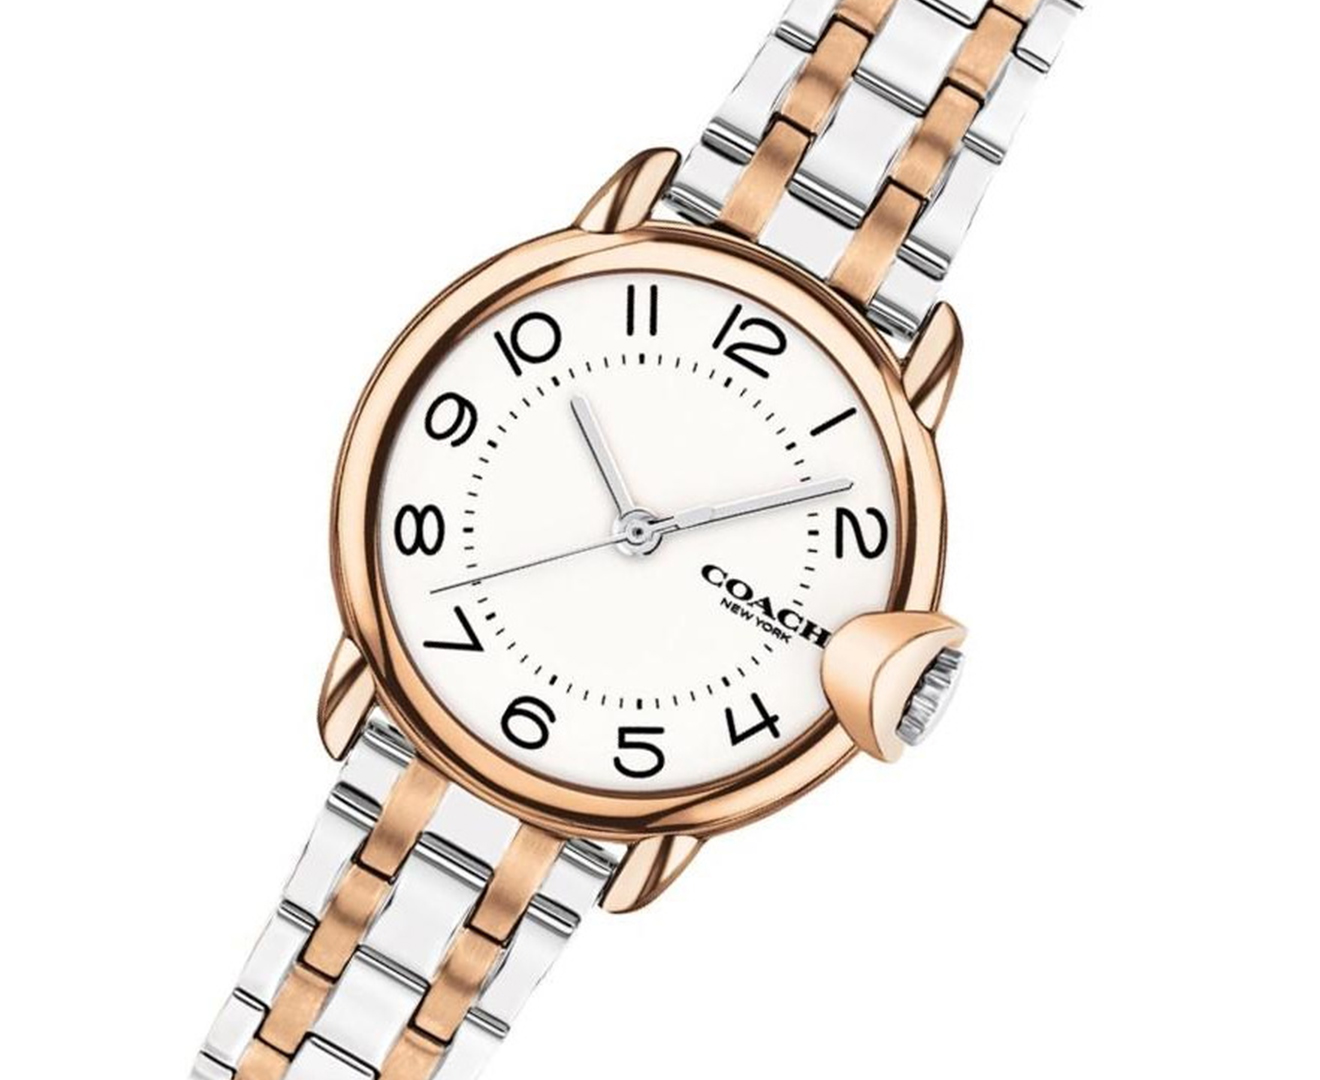 Shop All Women's Watches | SALE | Movado Company Store